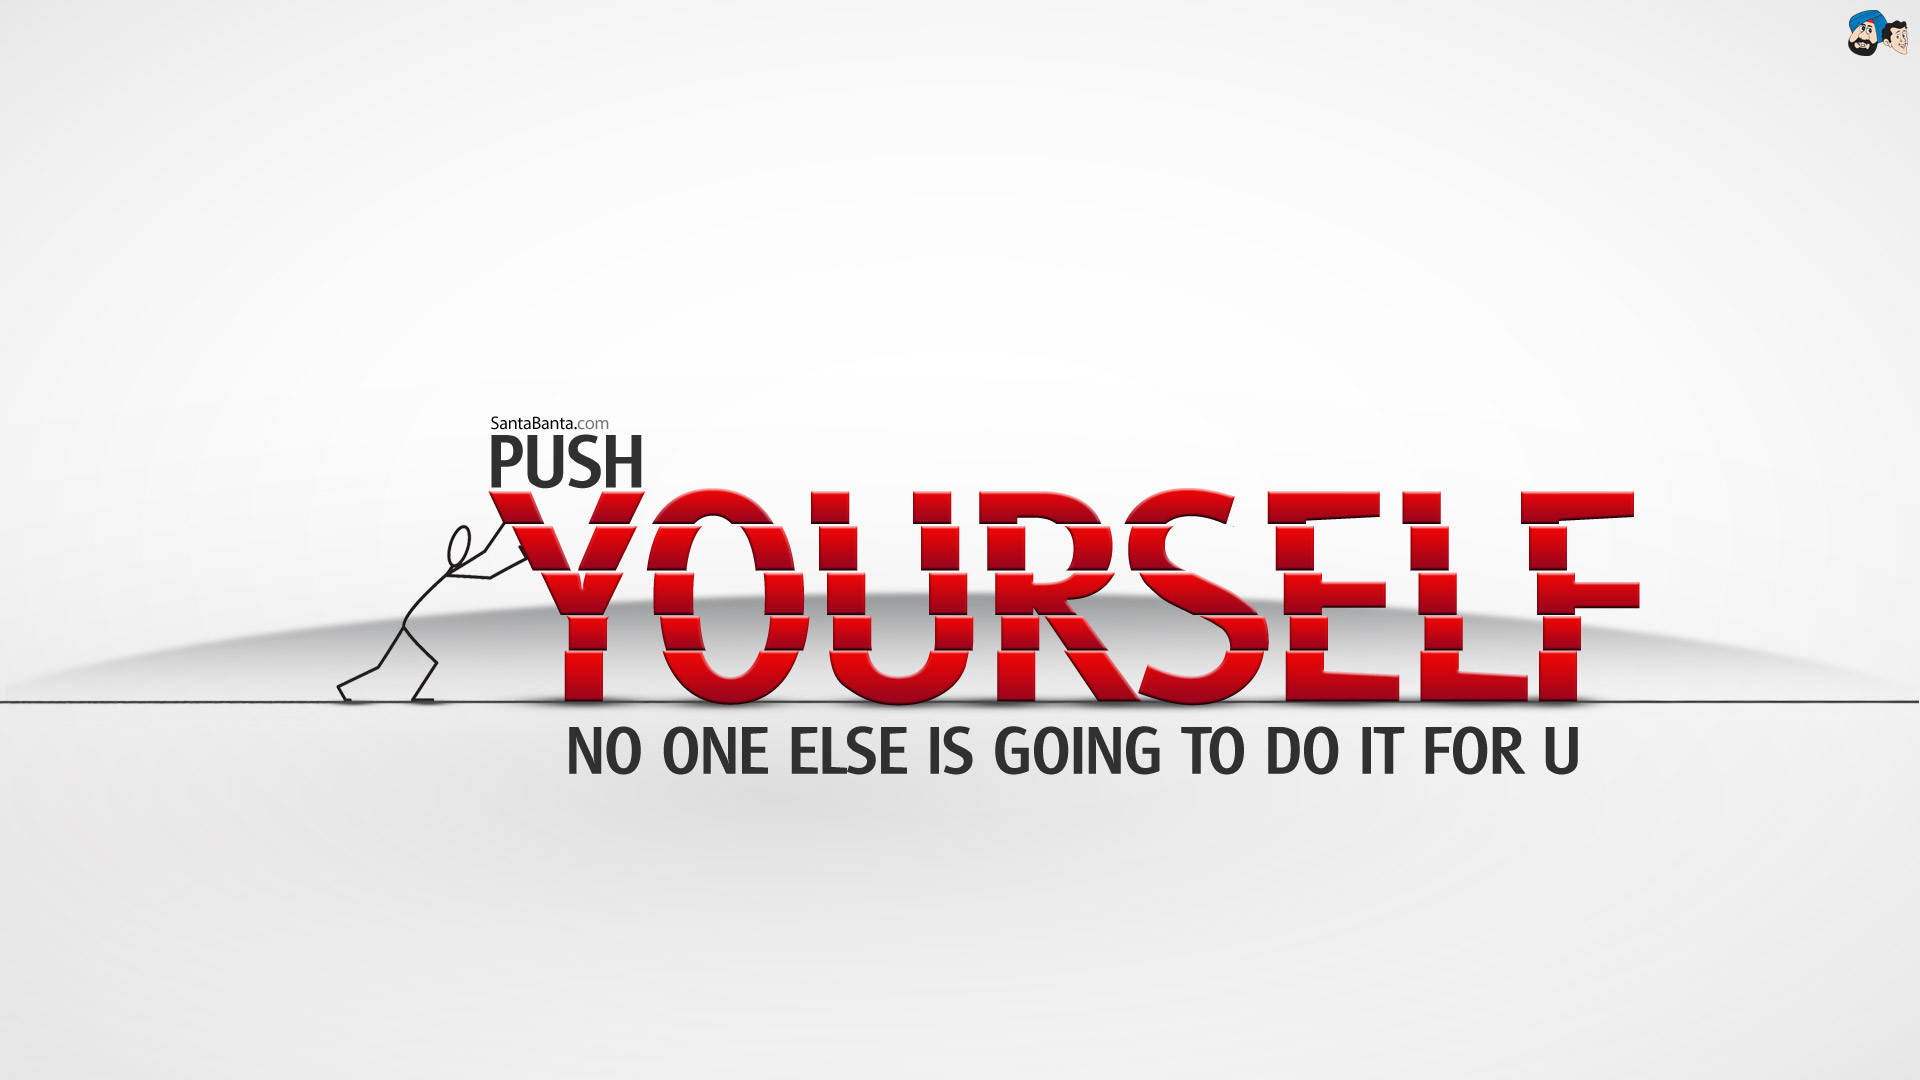 Update 79+ push yourself quotes wallpaper latest